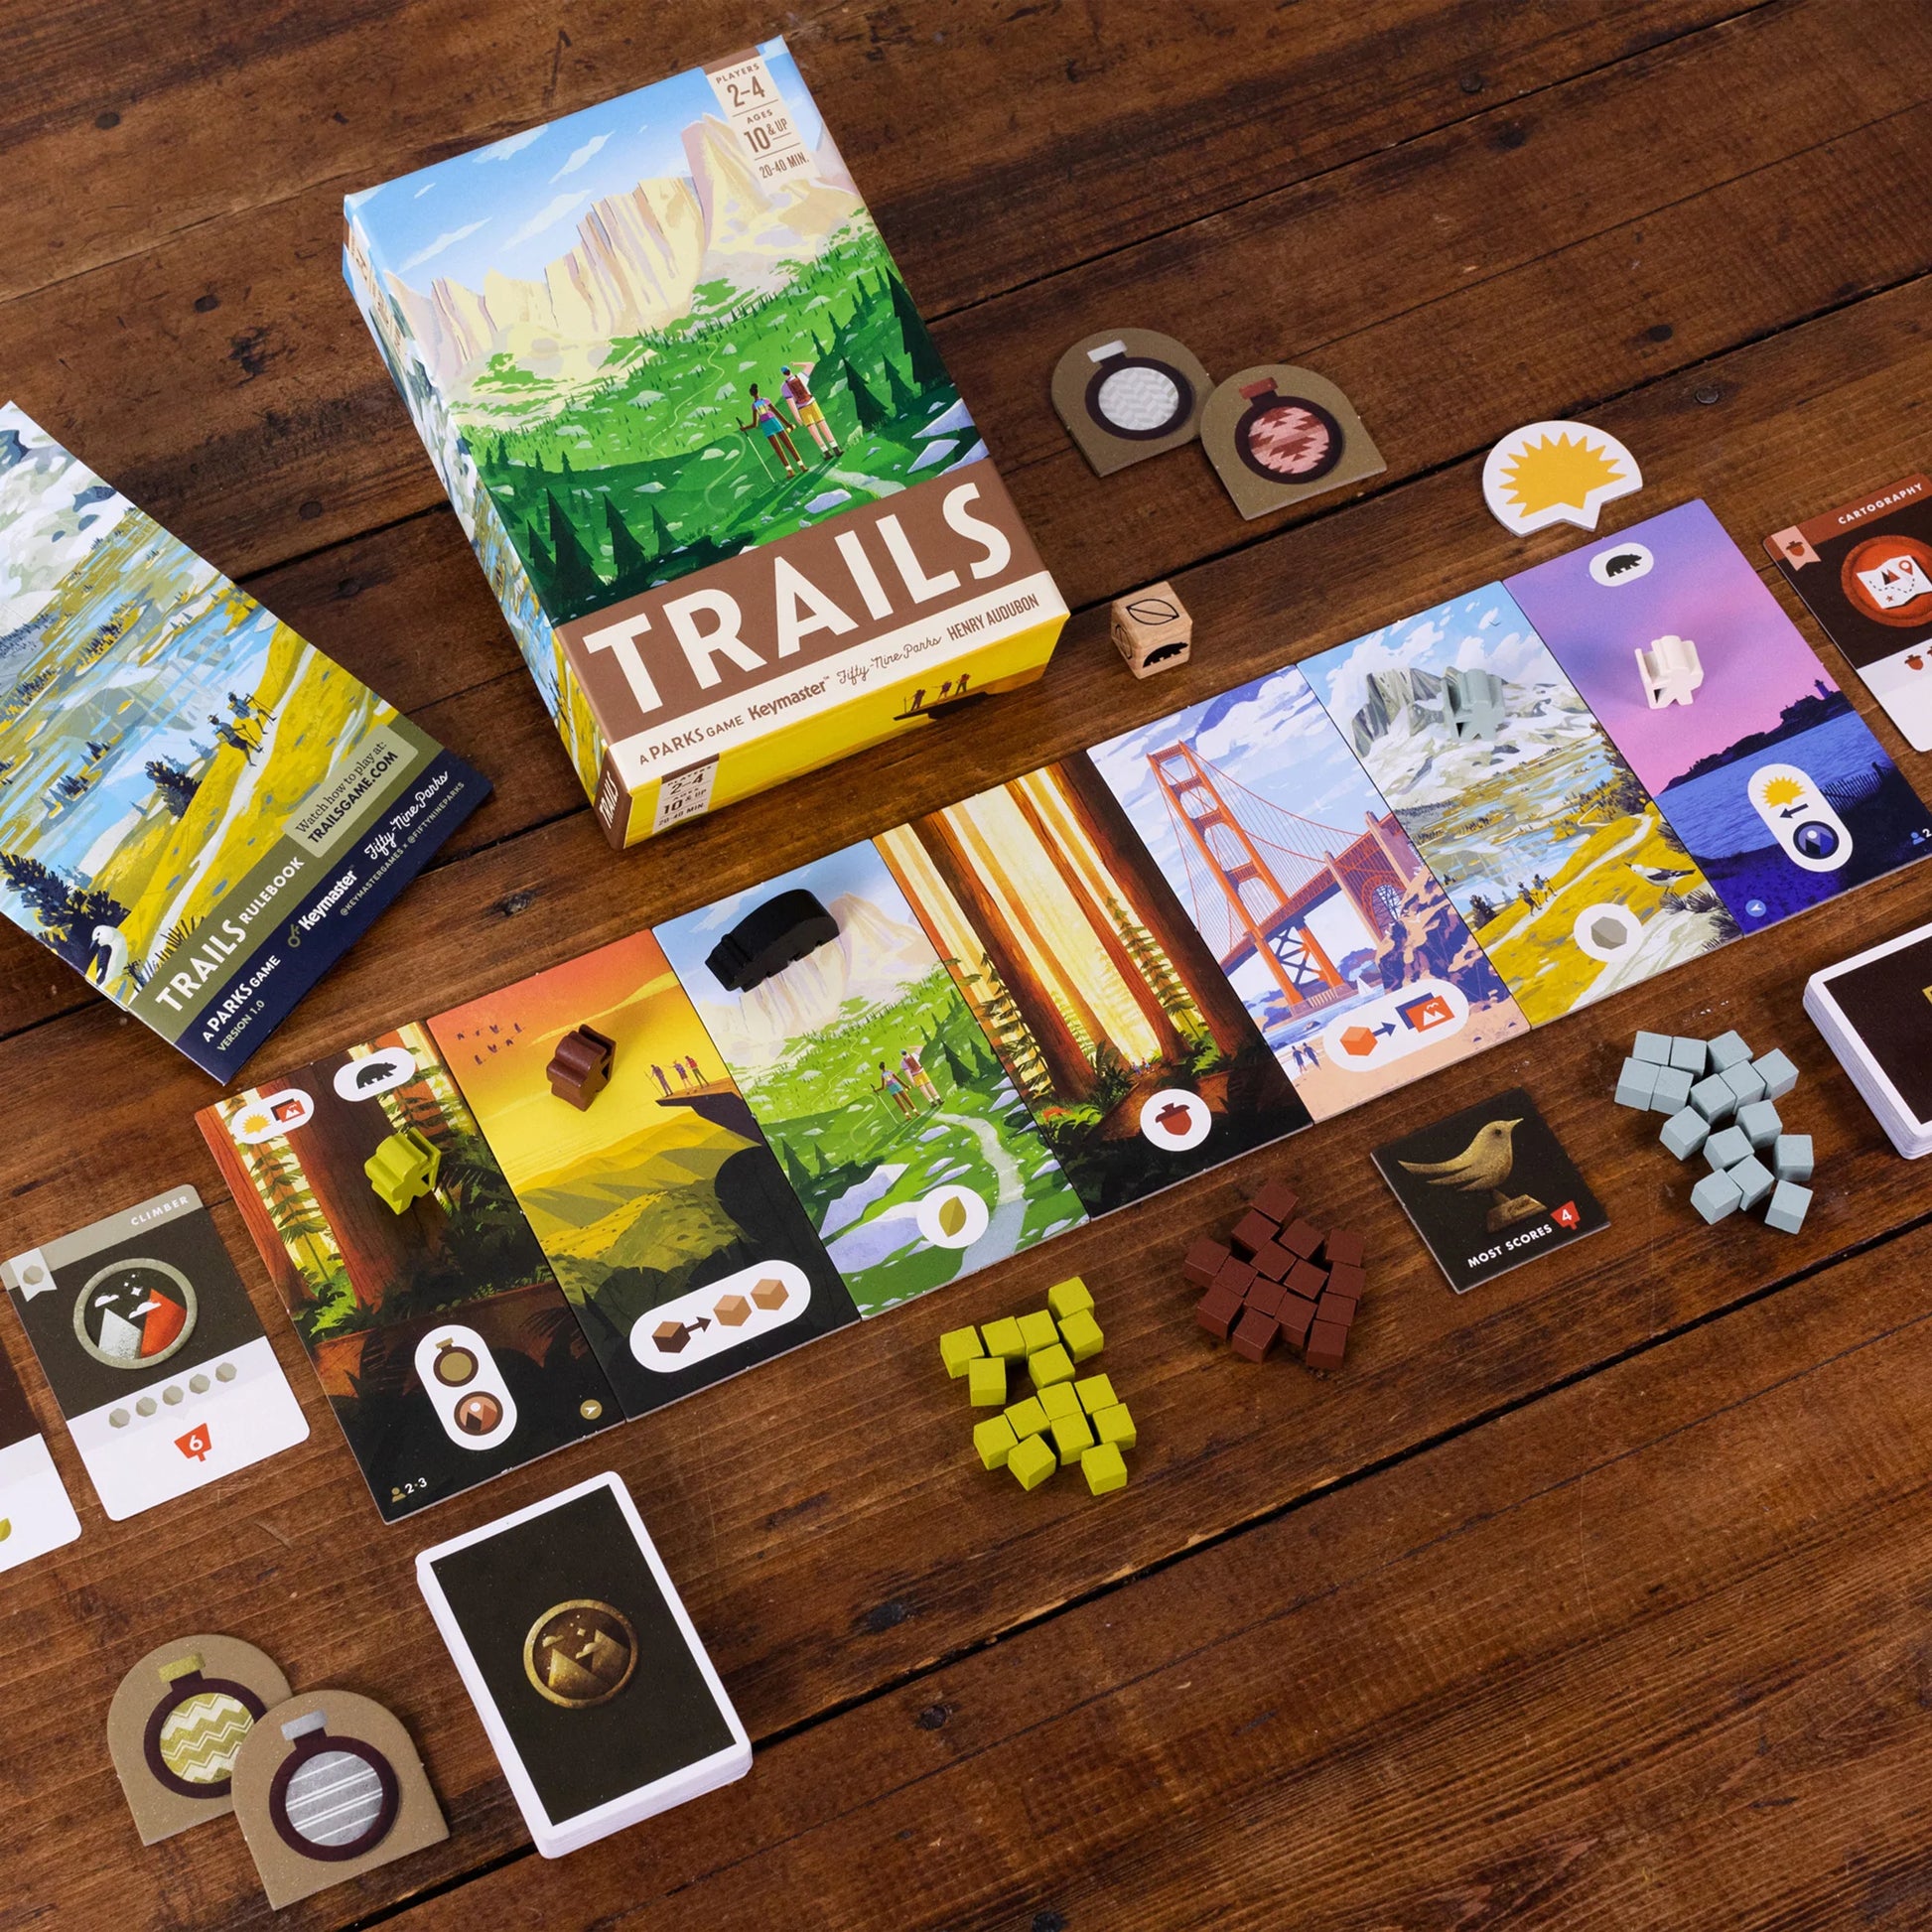 Trails Content on table